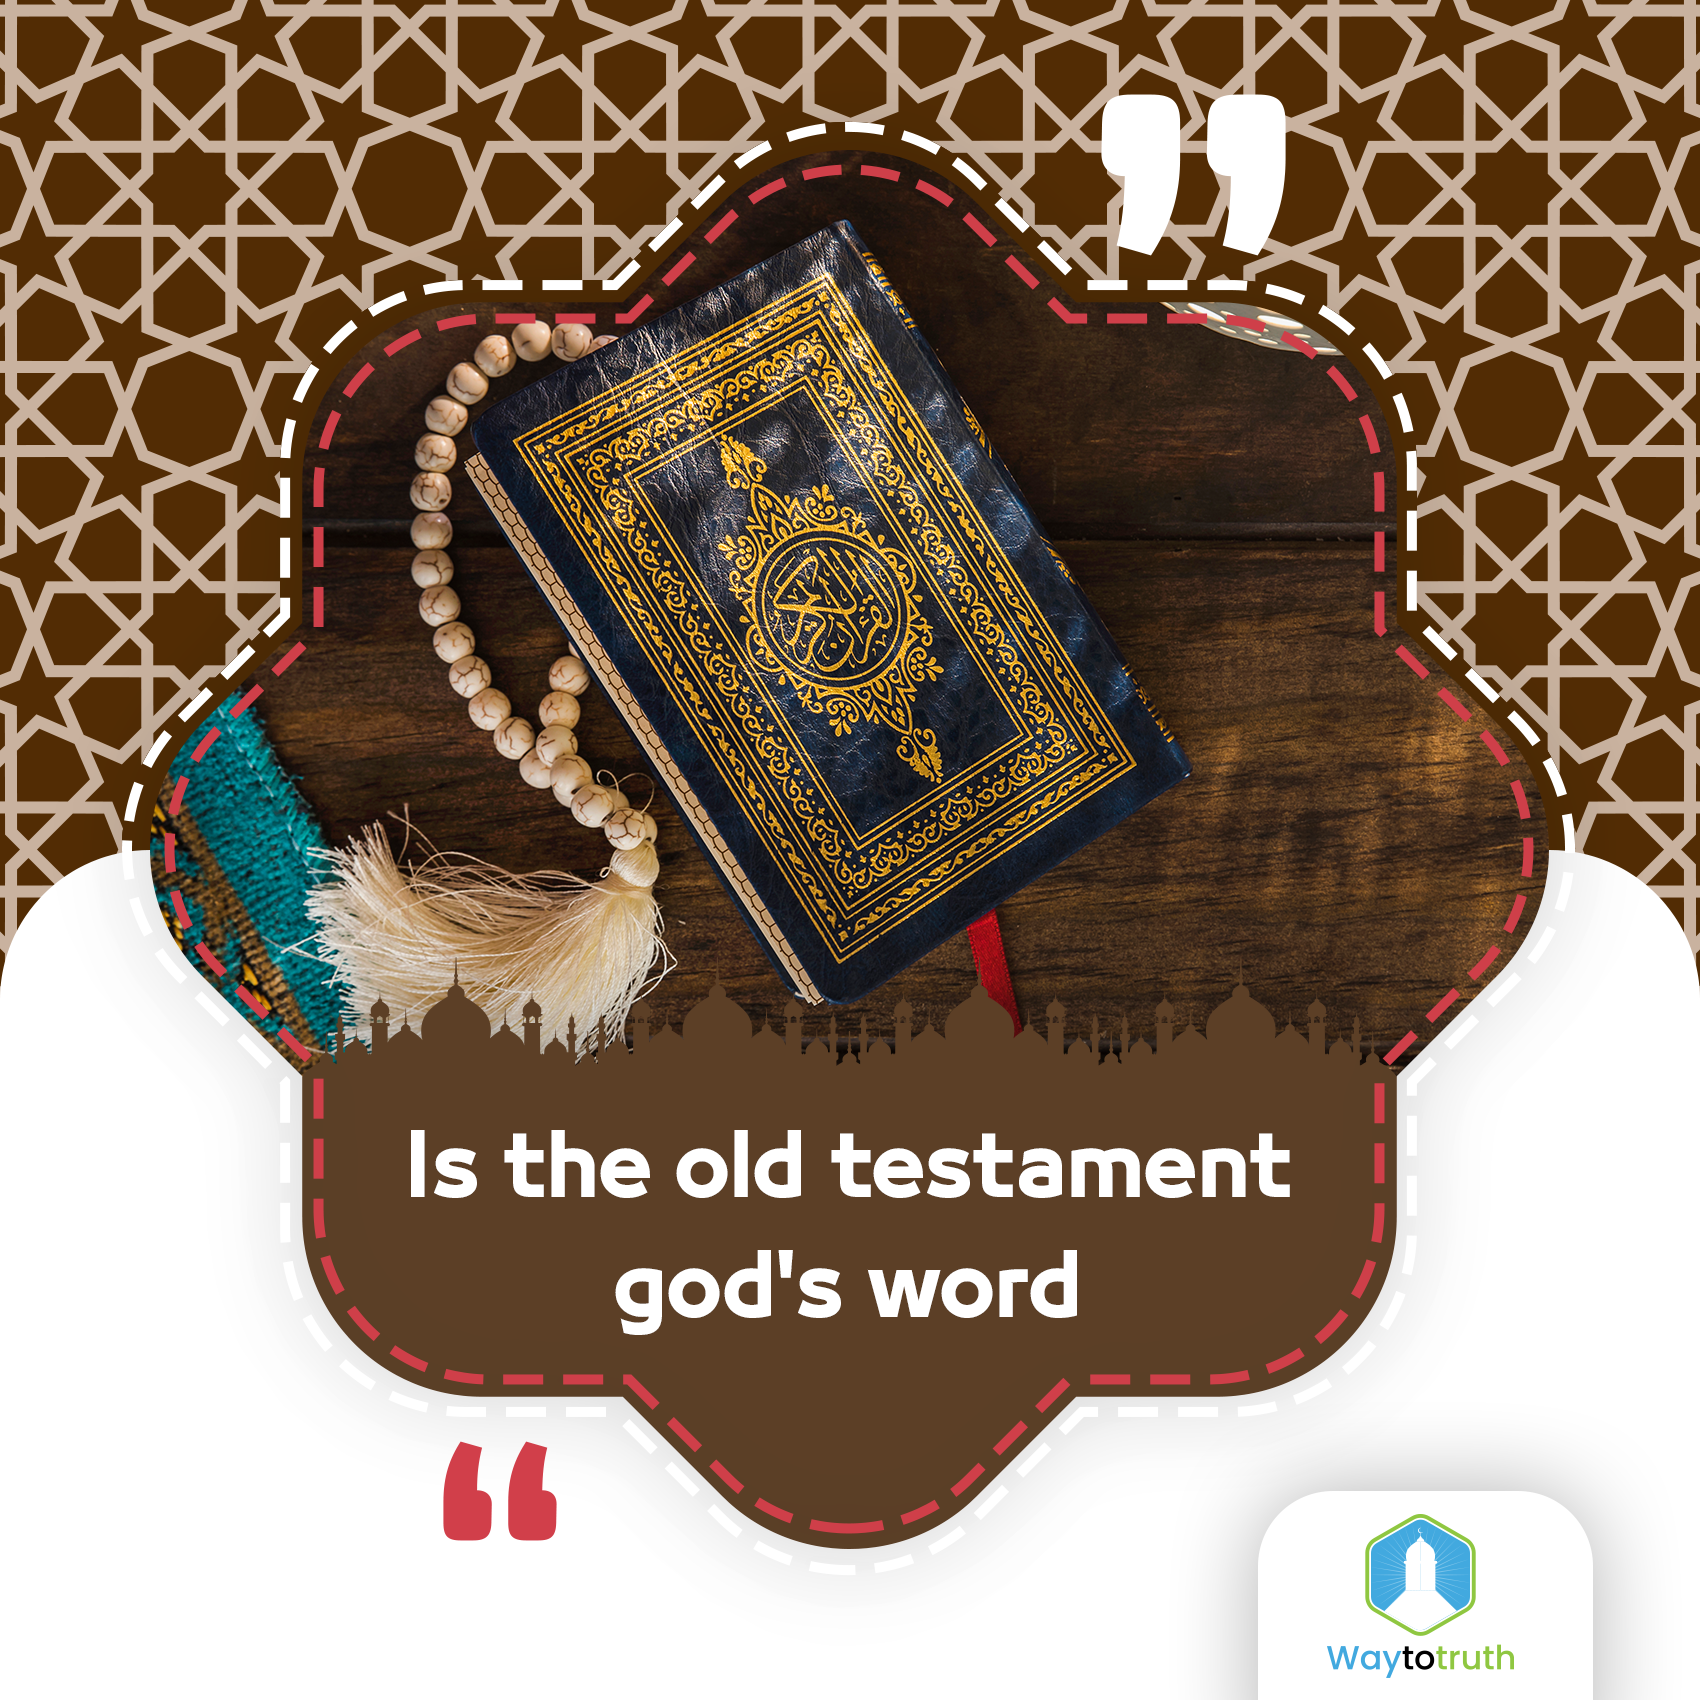 Is the old testament god's word